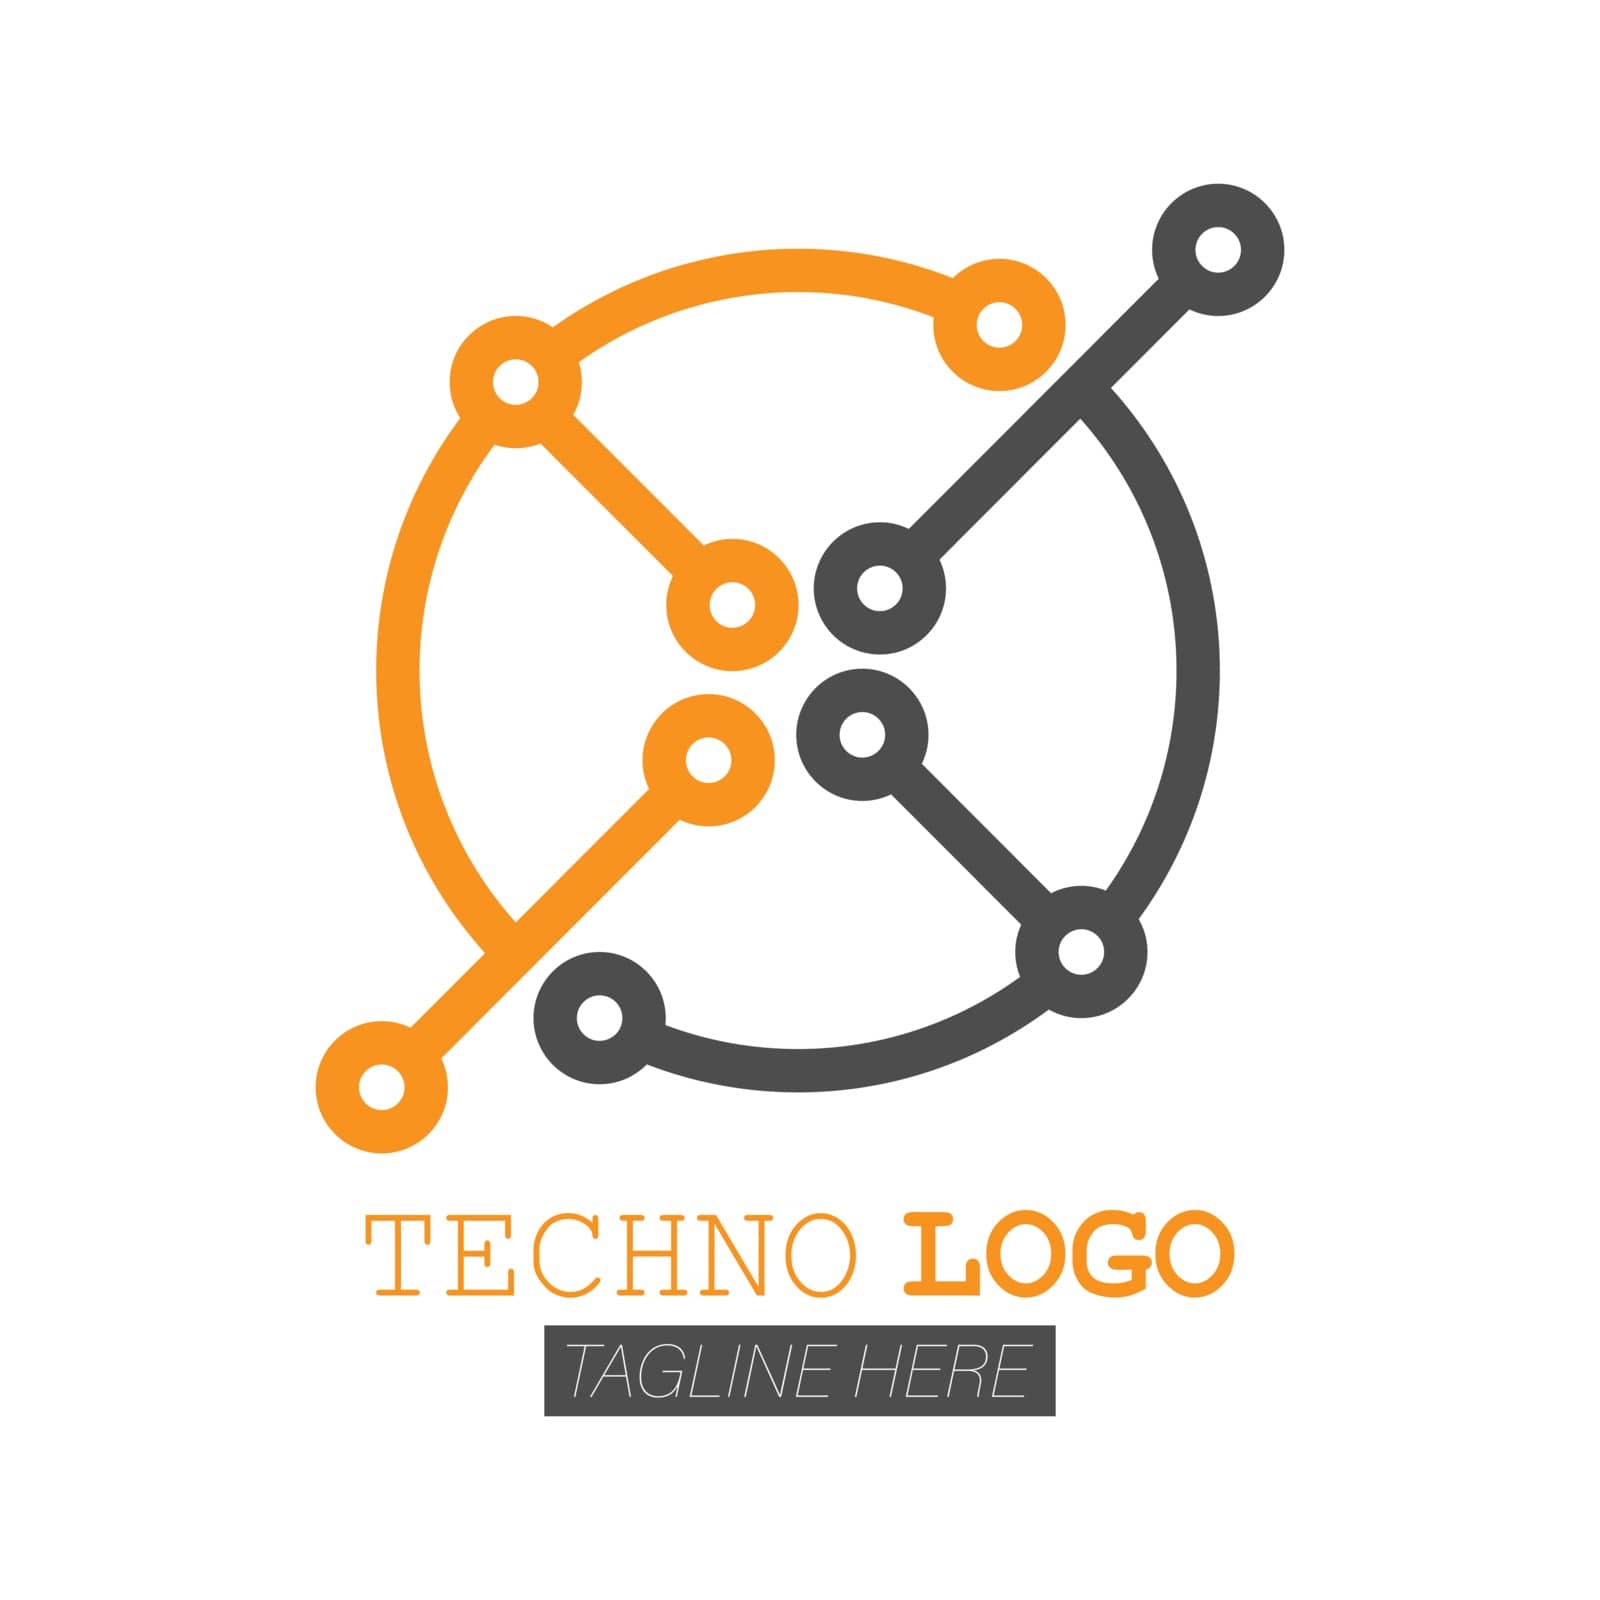 Techno logo. High-tech and innovative business. Simple vector illustration isolated on a white background